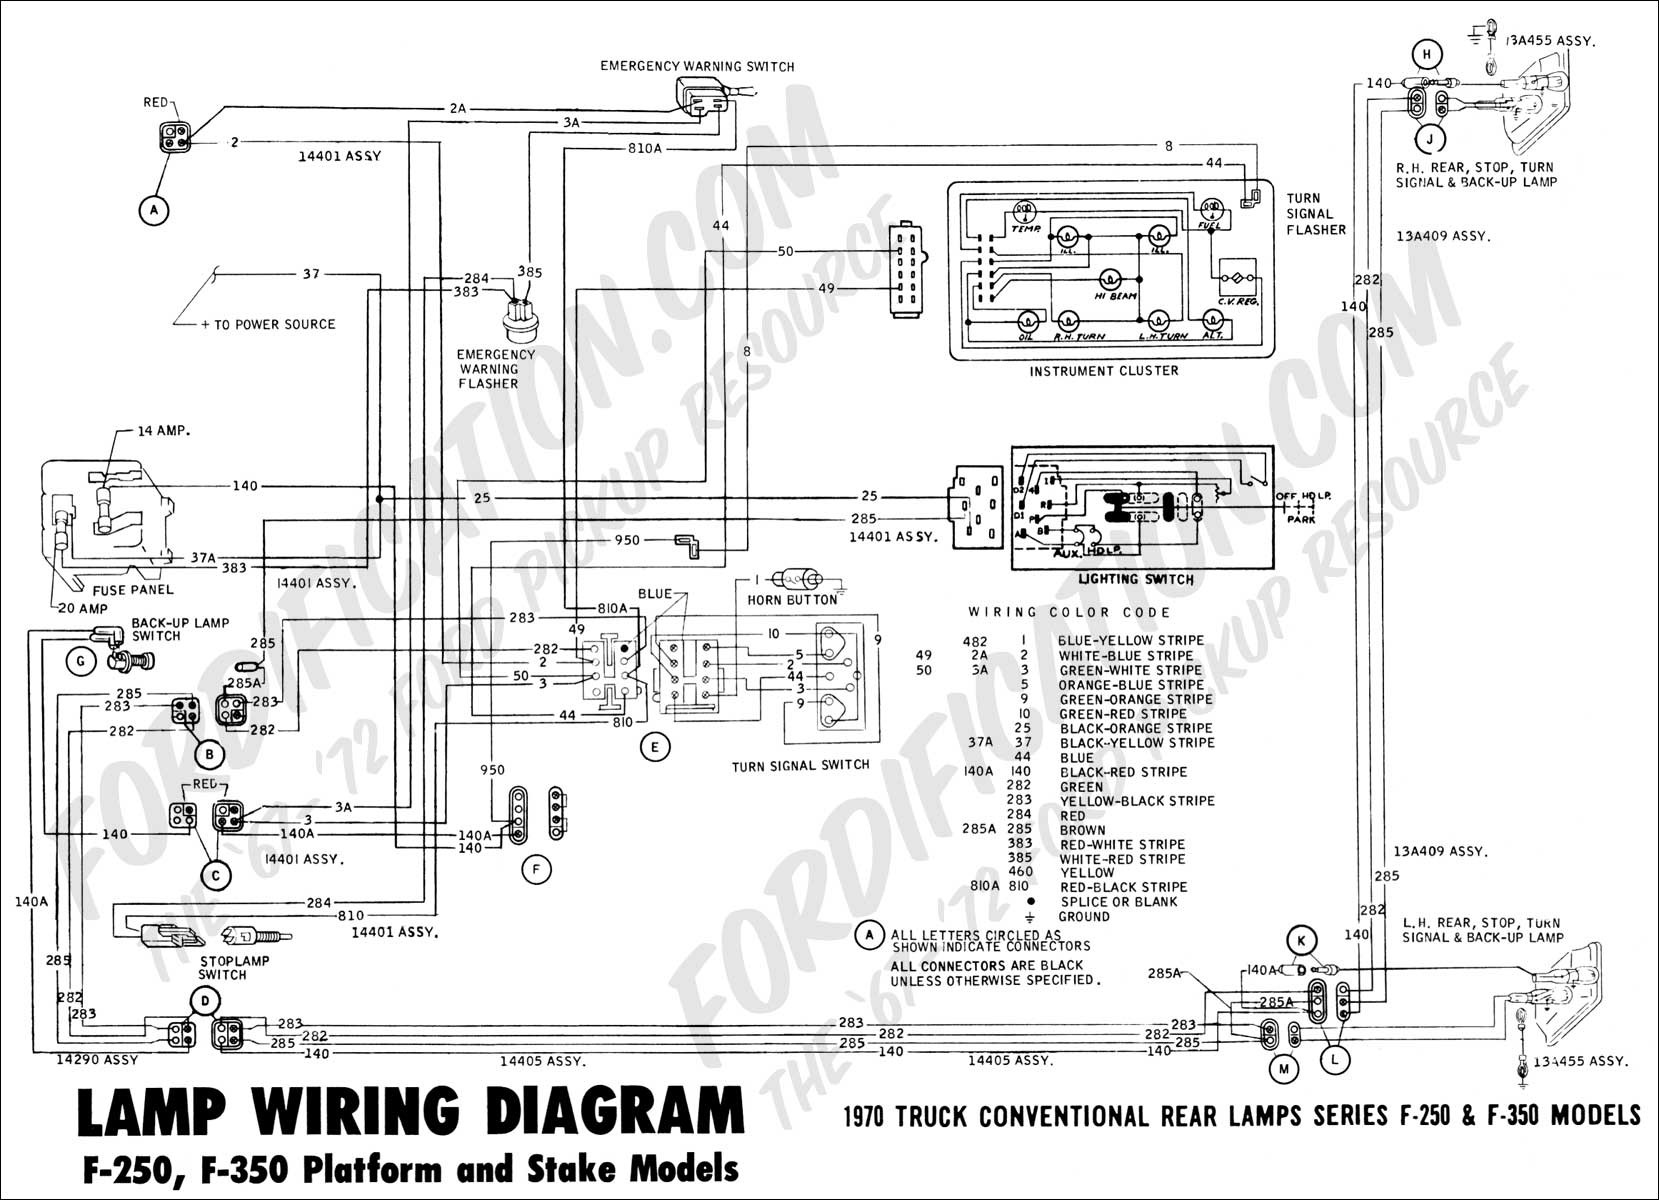 2000 ford F-150 Trailer Wiring Diagram ford Truck Technical Drawings and Schematics – Section H – Wiring … Of 2000 ford F-150 Trailer Wiring Diagram